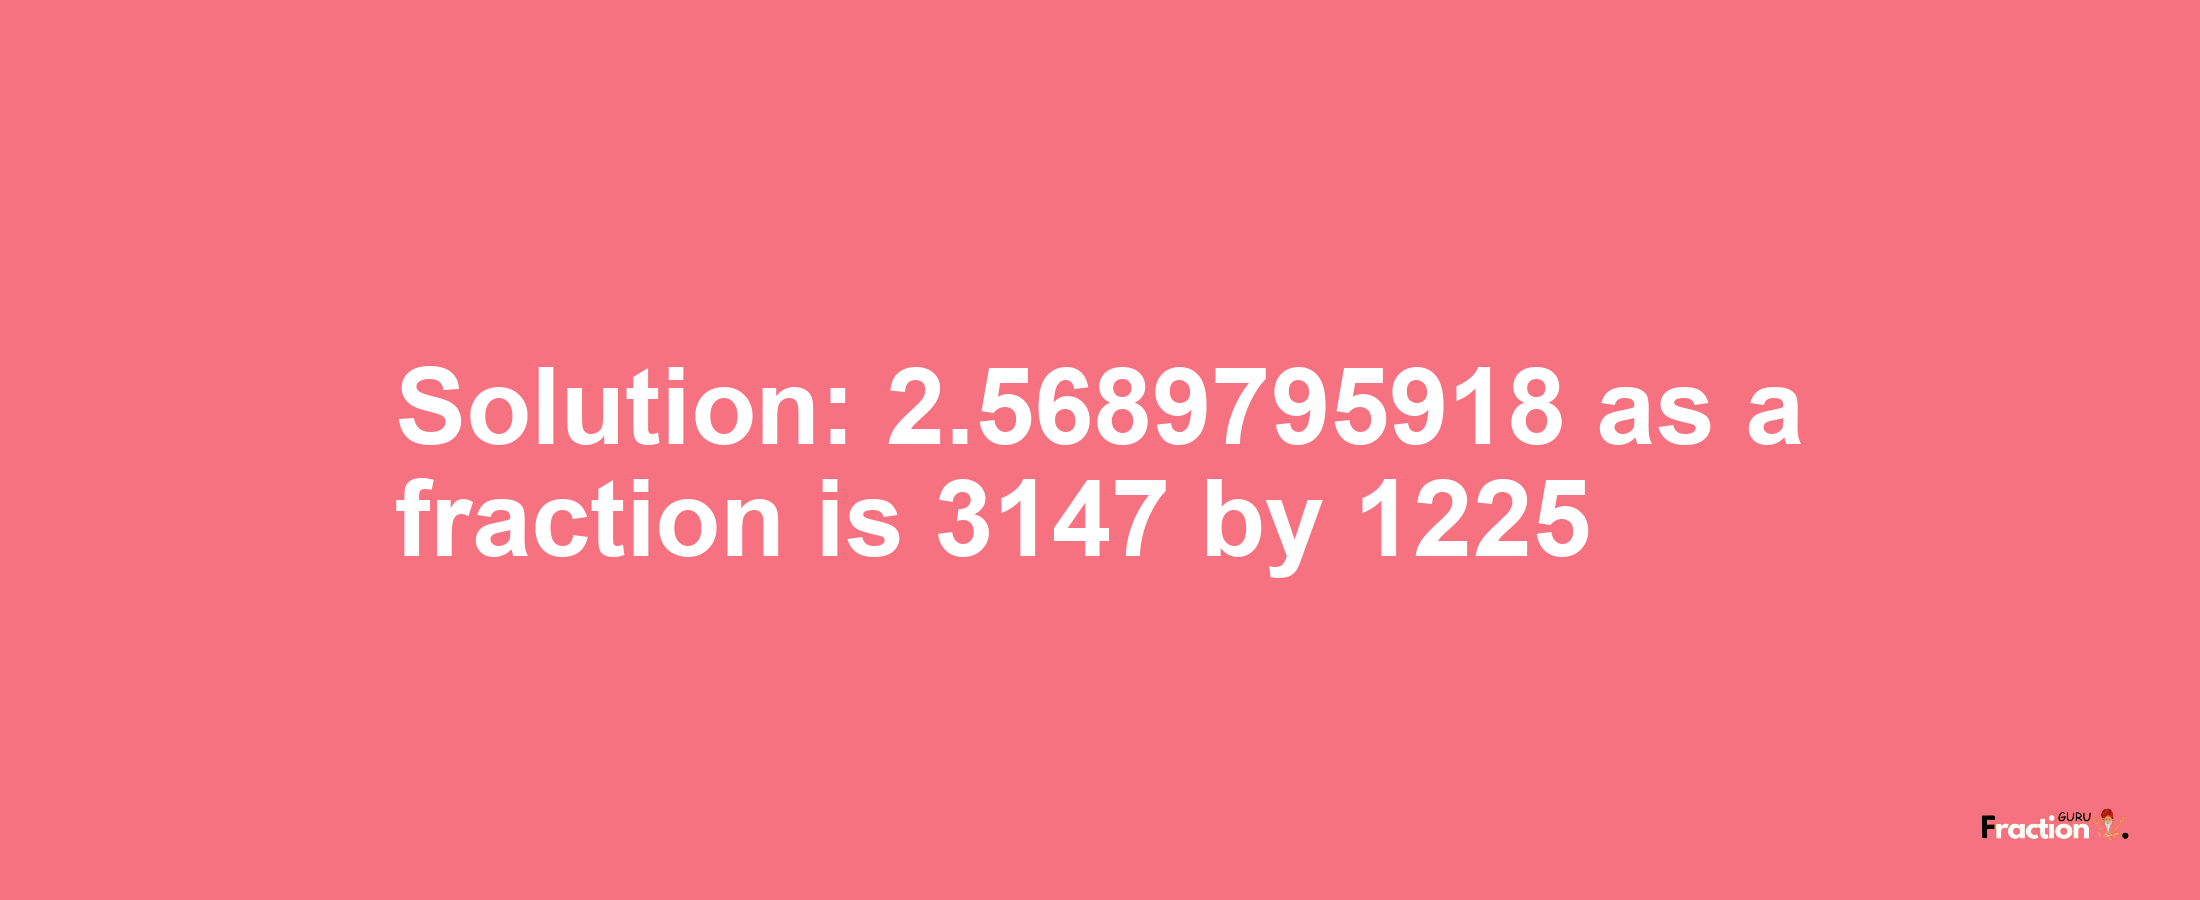 Solution:2.5689795918 as a fraction is 3147/1225